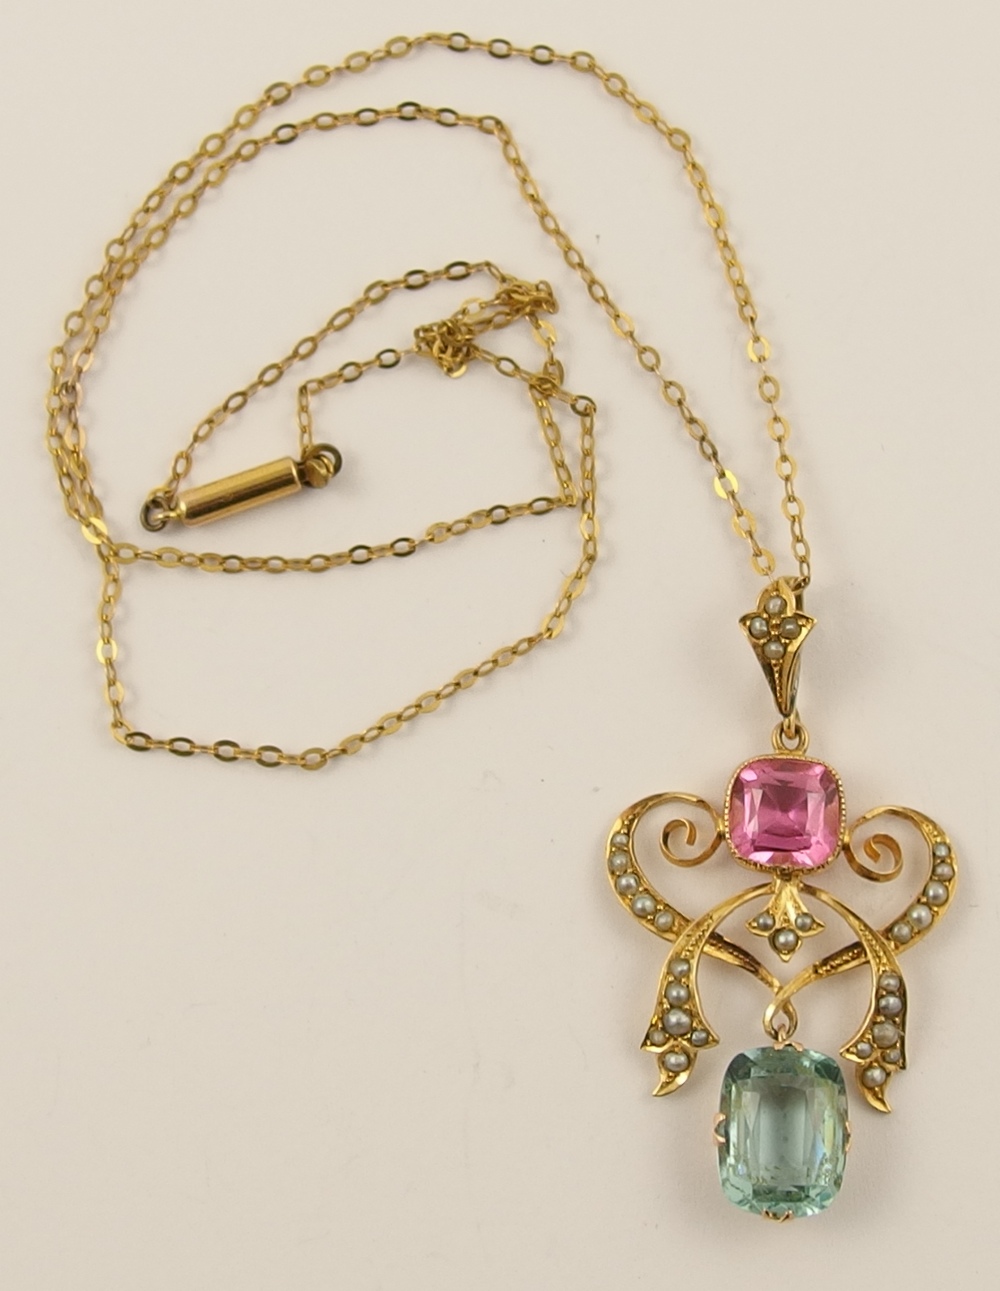 A 9ct Edwardian gem set pendant and chain - Image 2 of 2